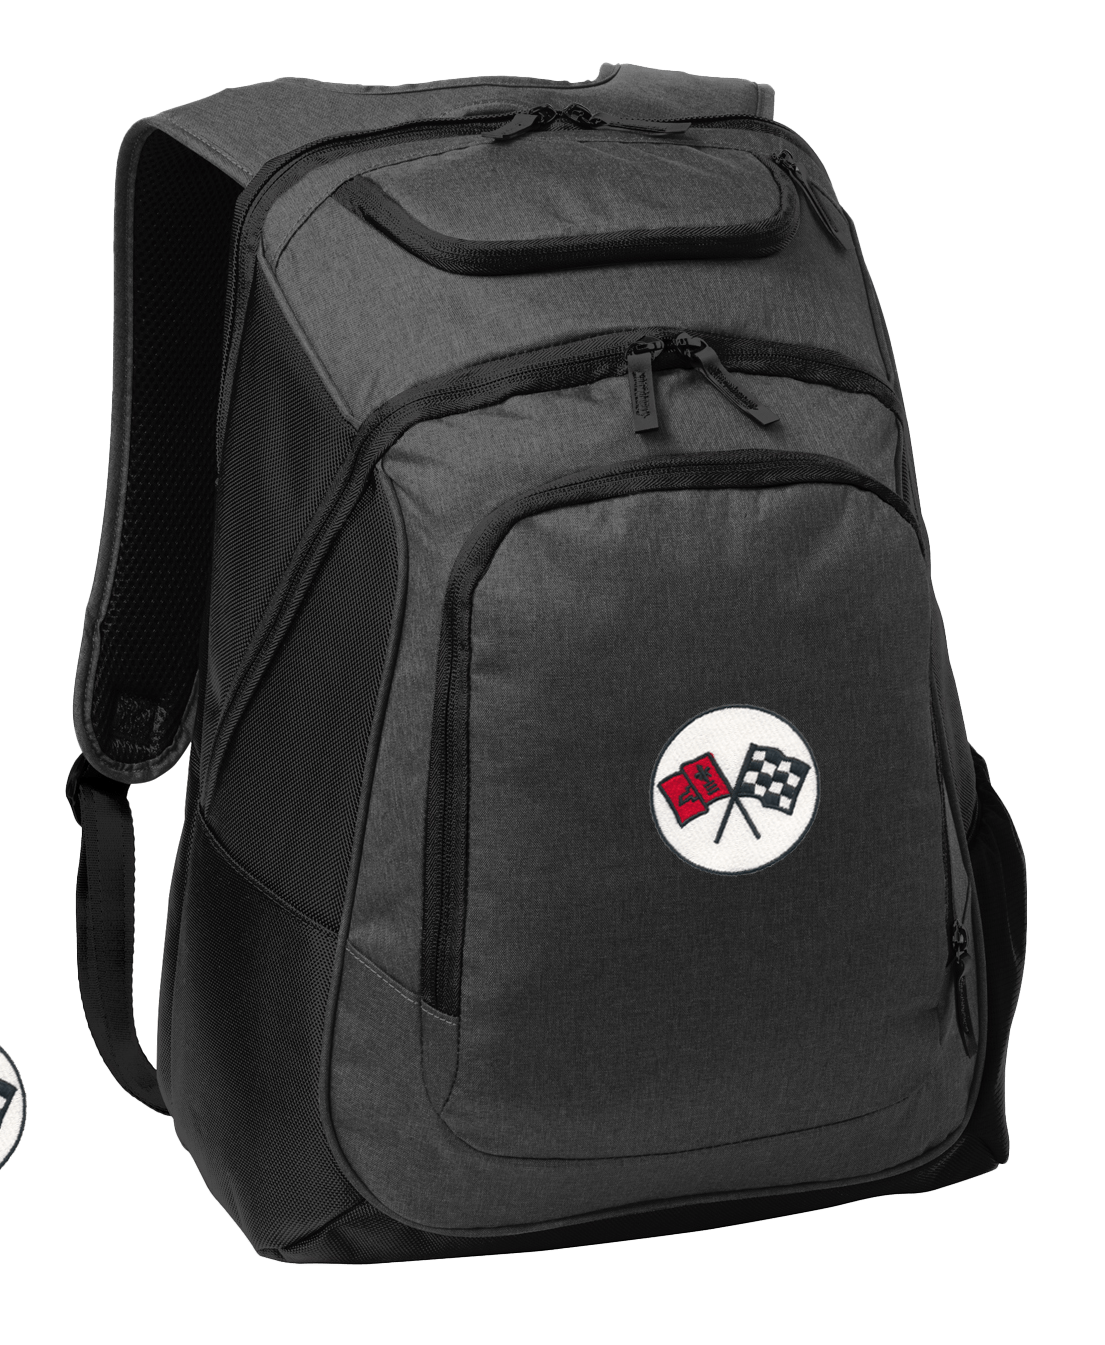 c2-corvette-embroidered-backpack